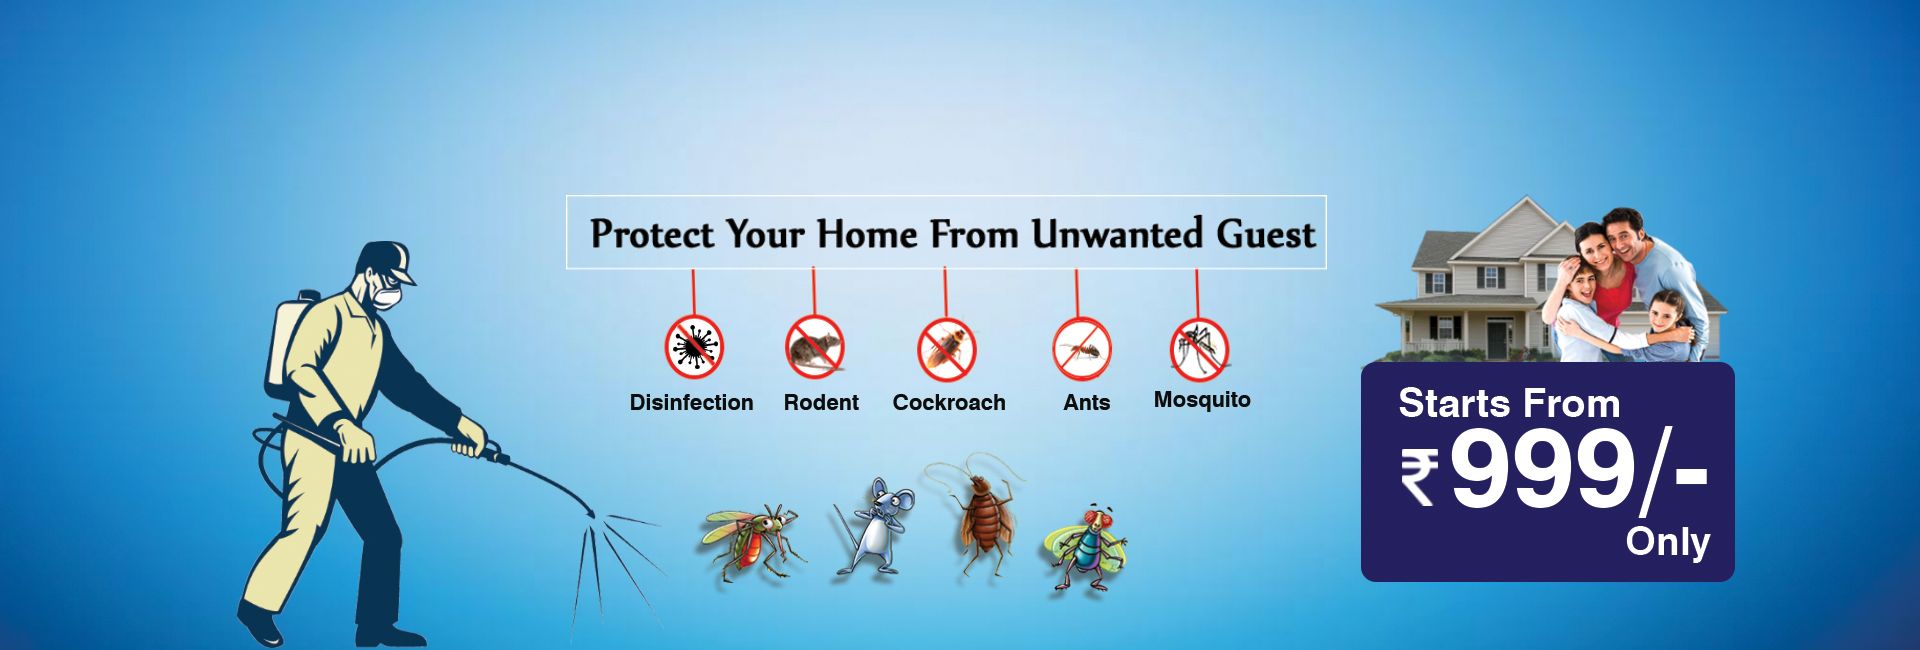 Pest Control Services For Mosquito in Ahmedabad